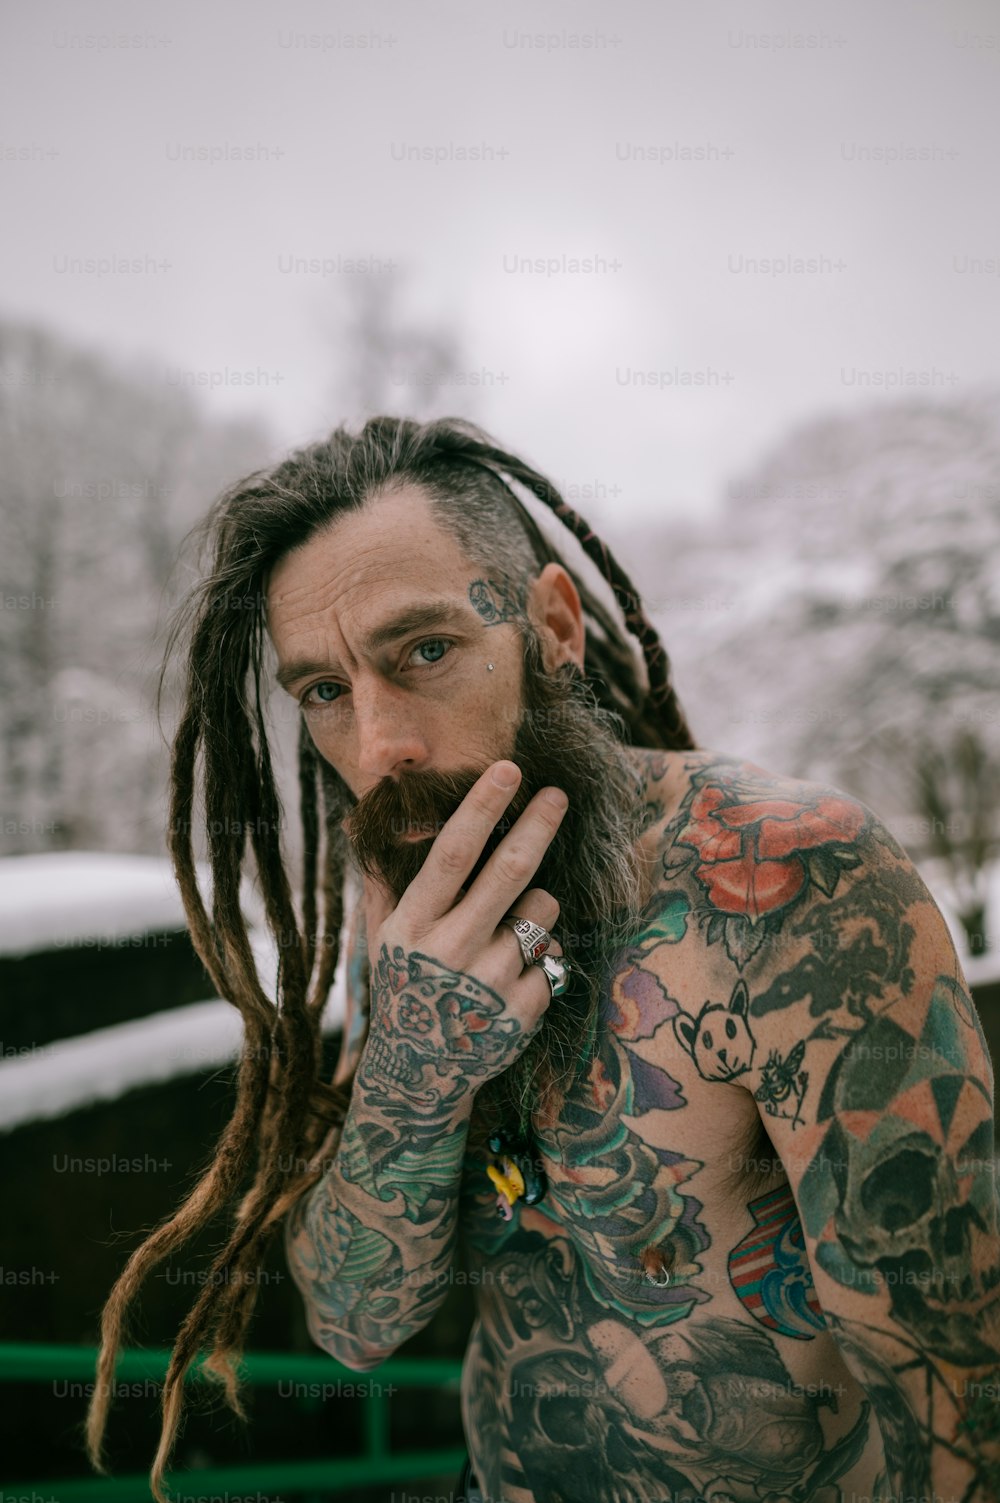 a man with long dreadlocks and tattoos on his face photo – Dreads Image on  Unsplash